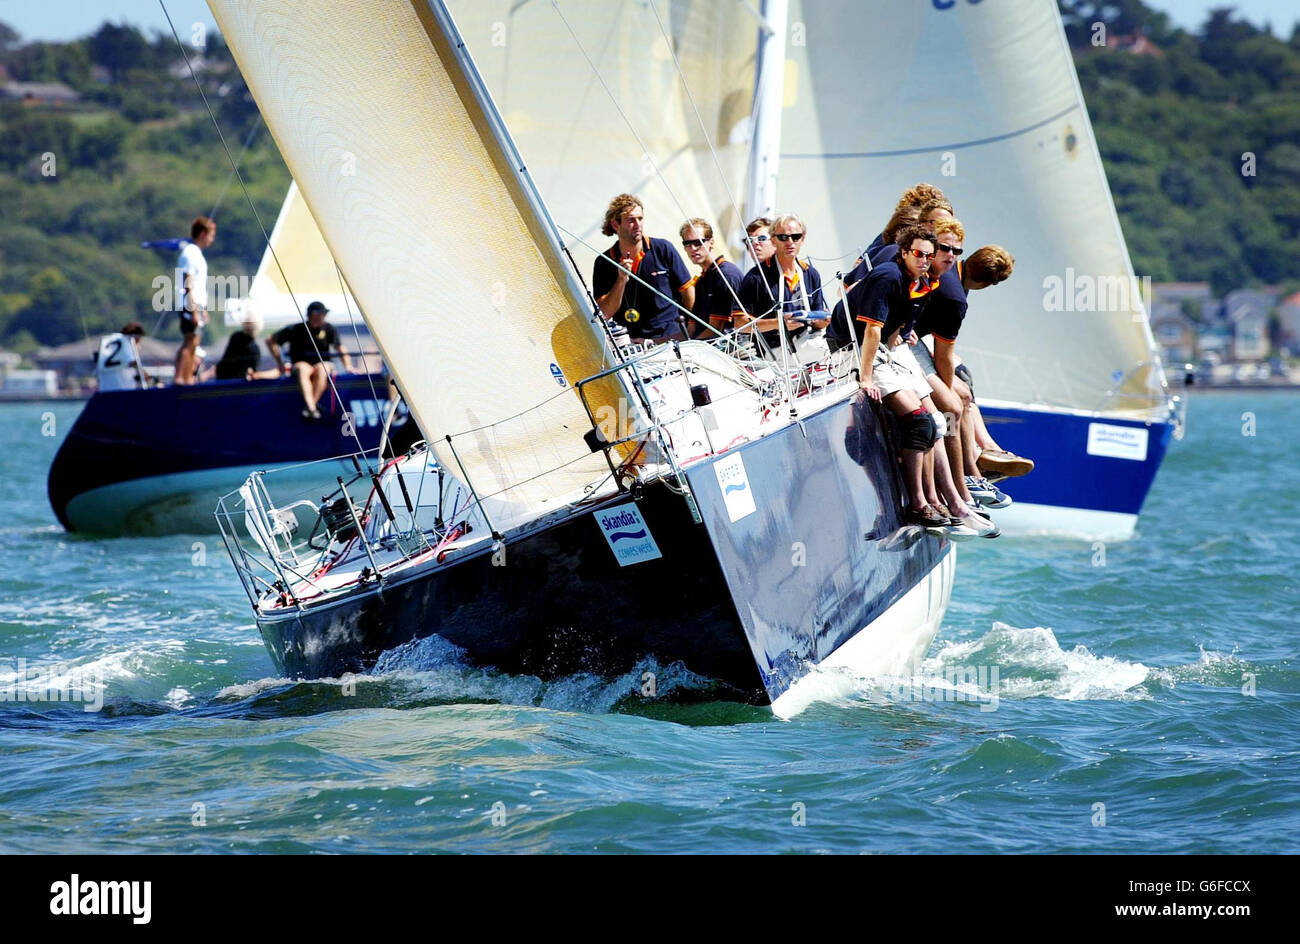 The dutch class two yacht Holmatro racing on the Solent during the first day of Skandia Cowes Week. The annual regatta on the Isle of Wight is the biggest sailing event in the world, and lasts for eight days. Stock Photo